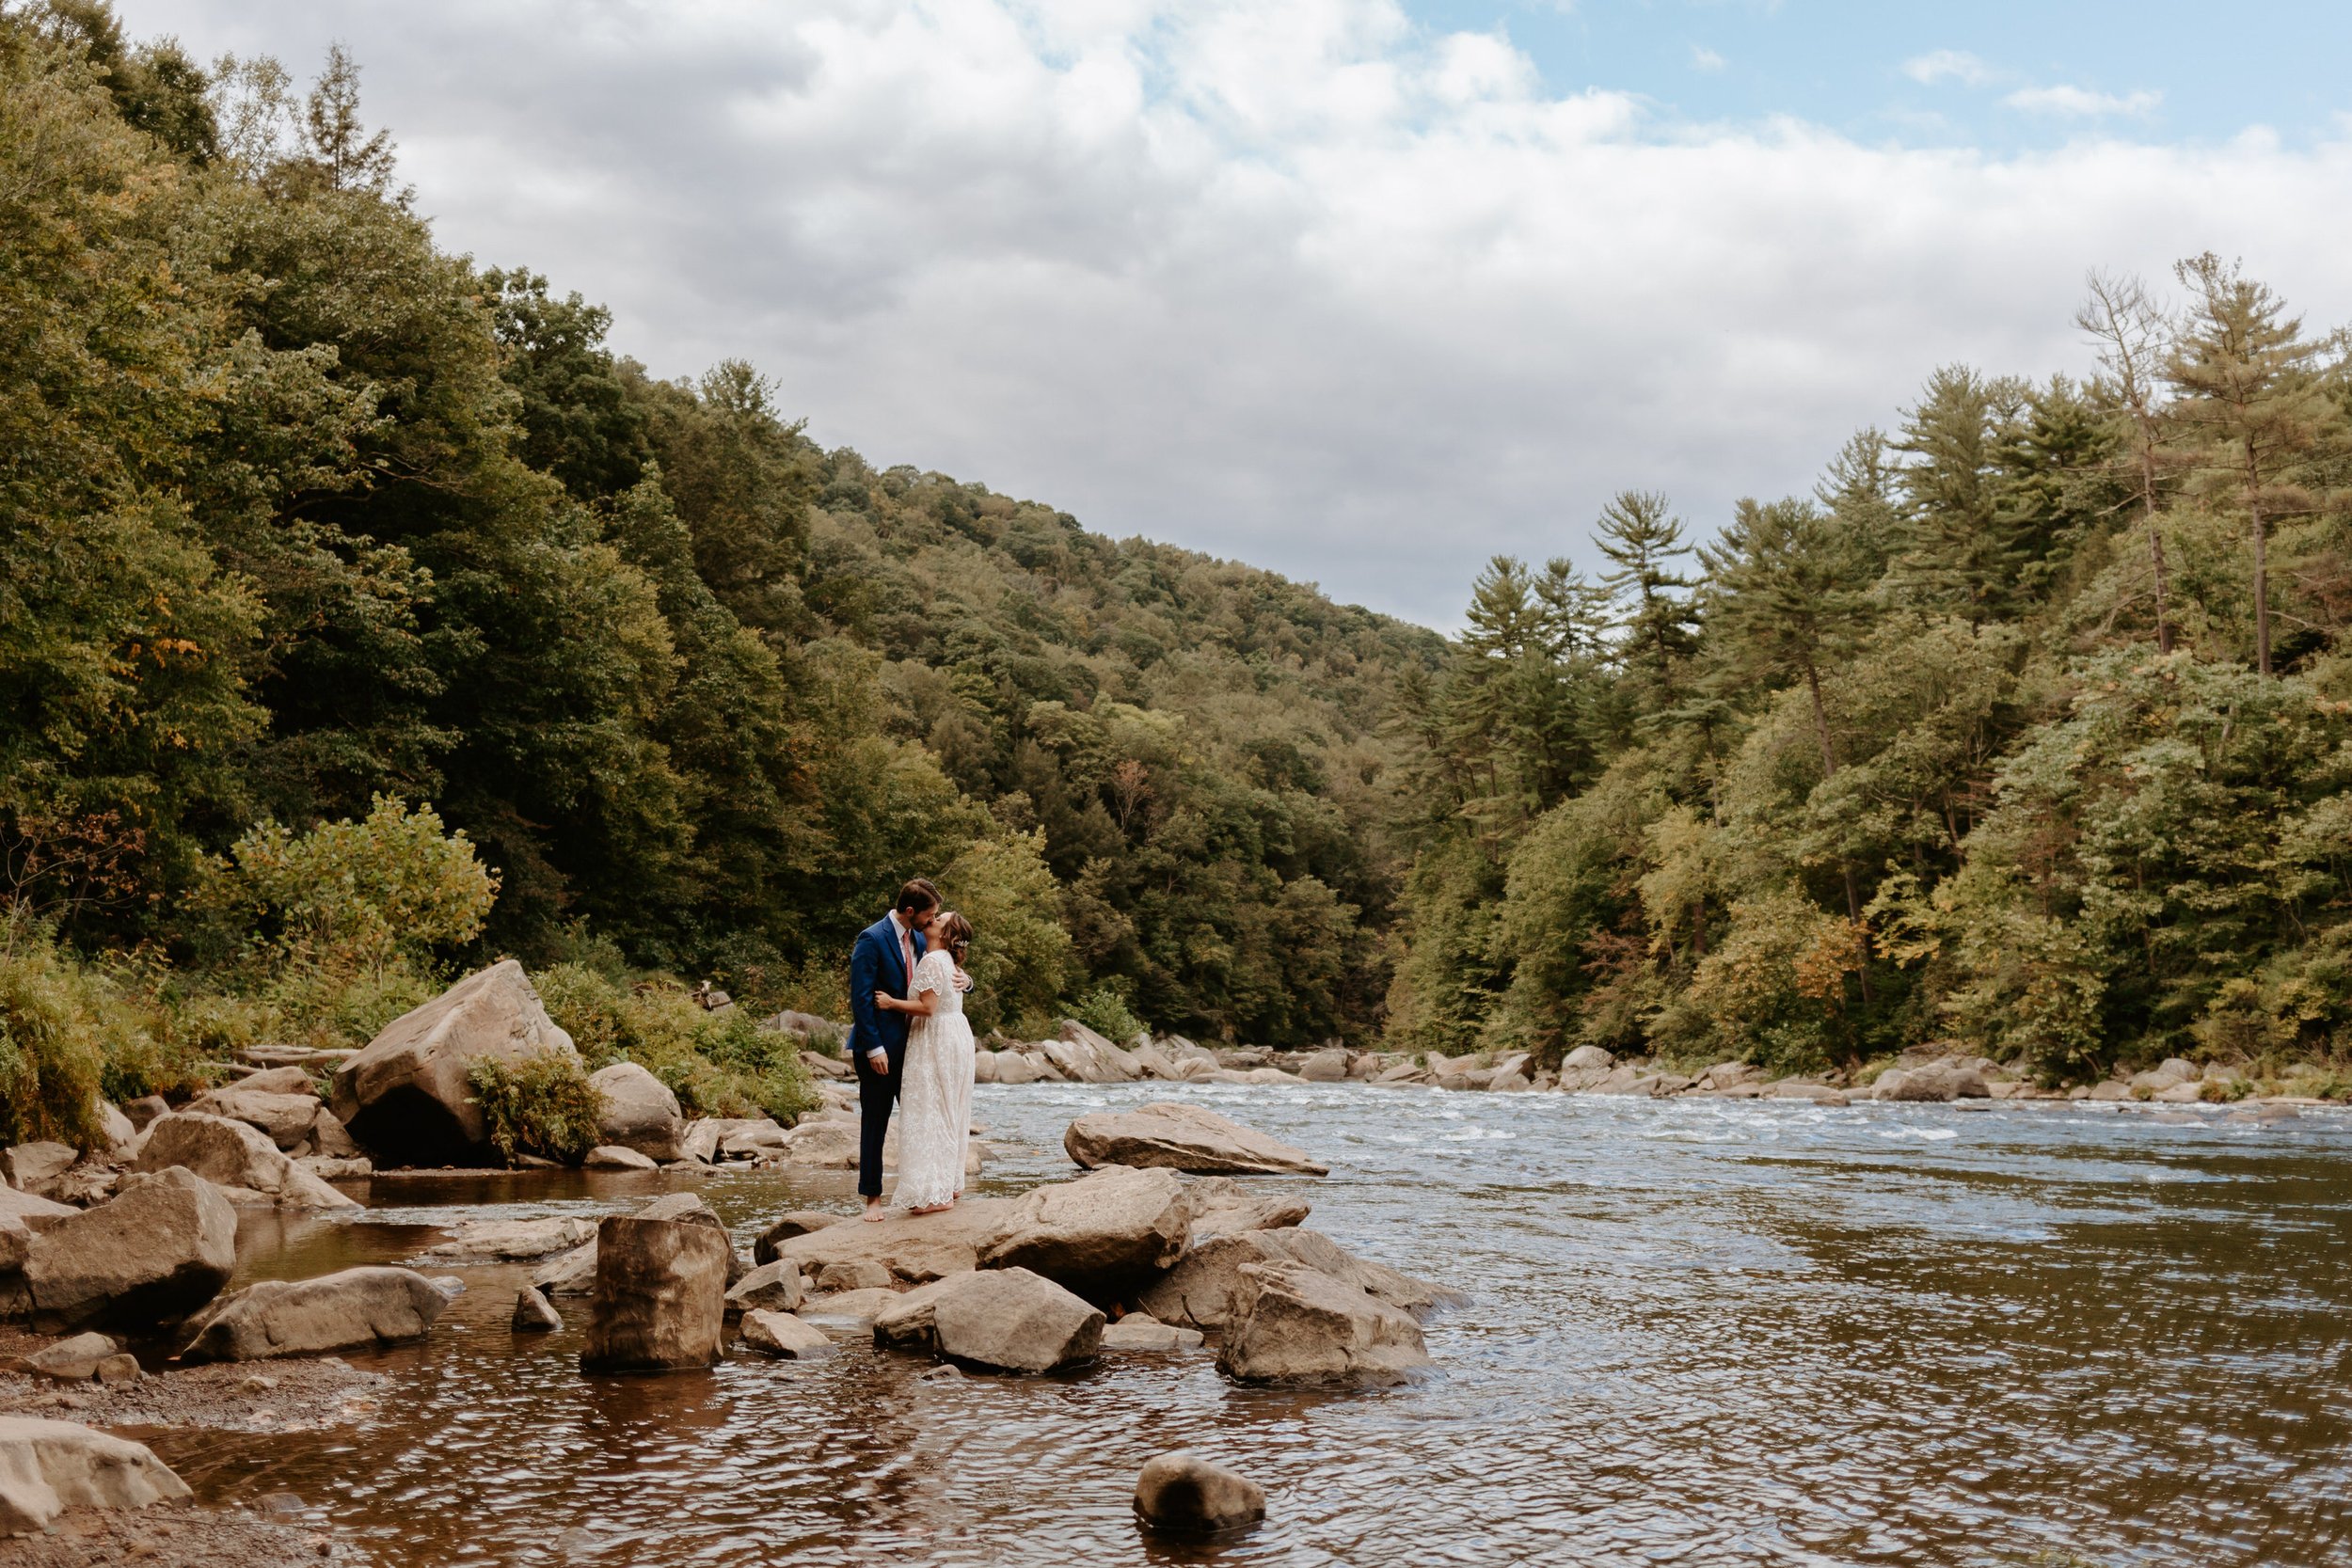 Couple kissing on rock on the edge of a river.